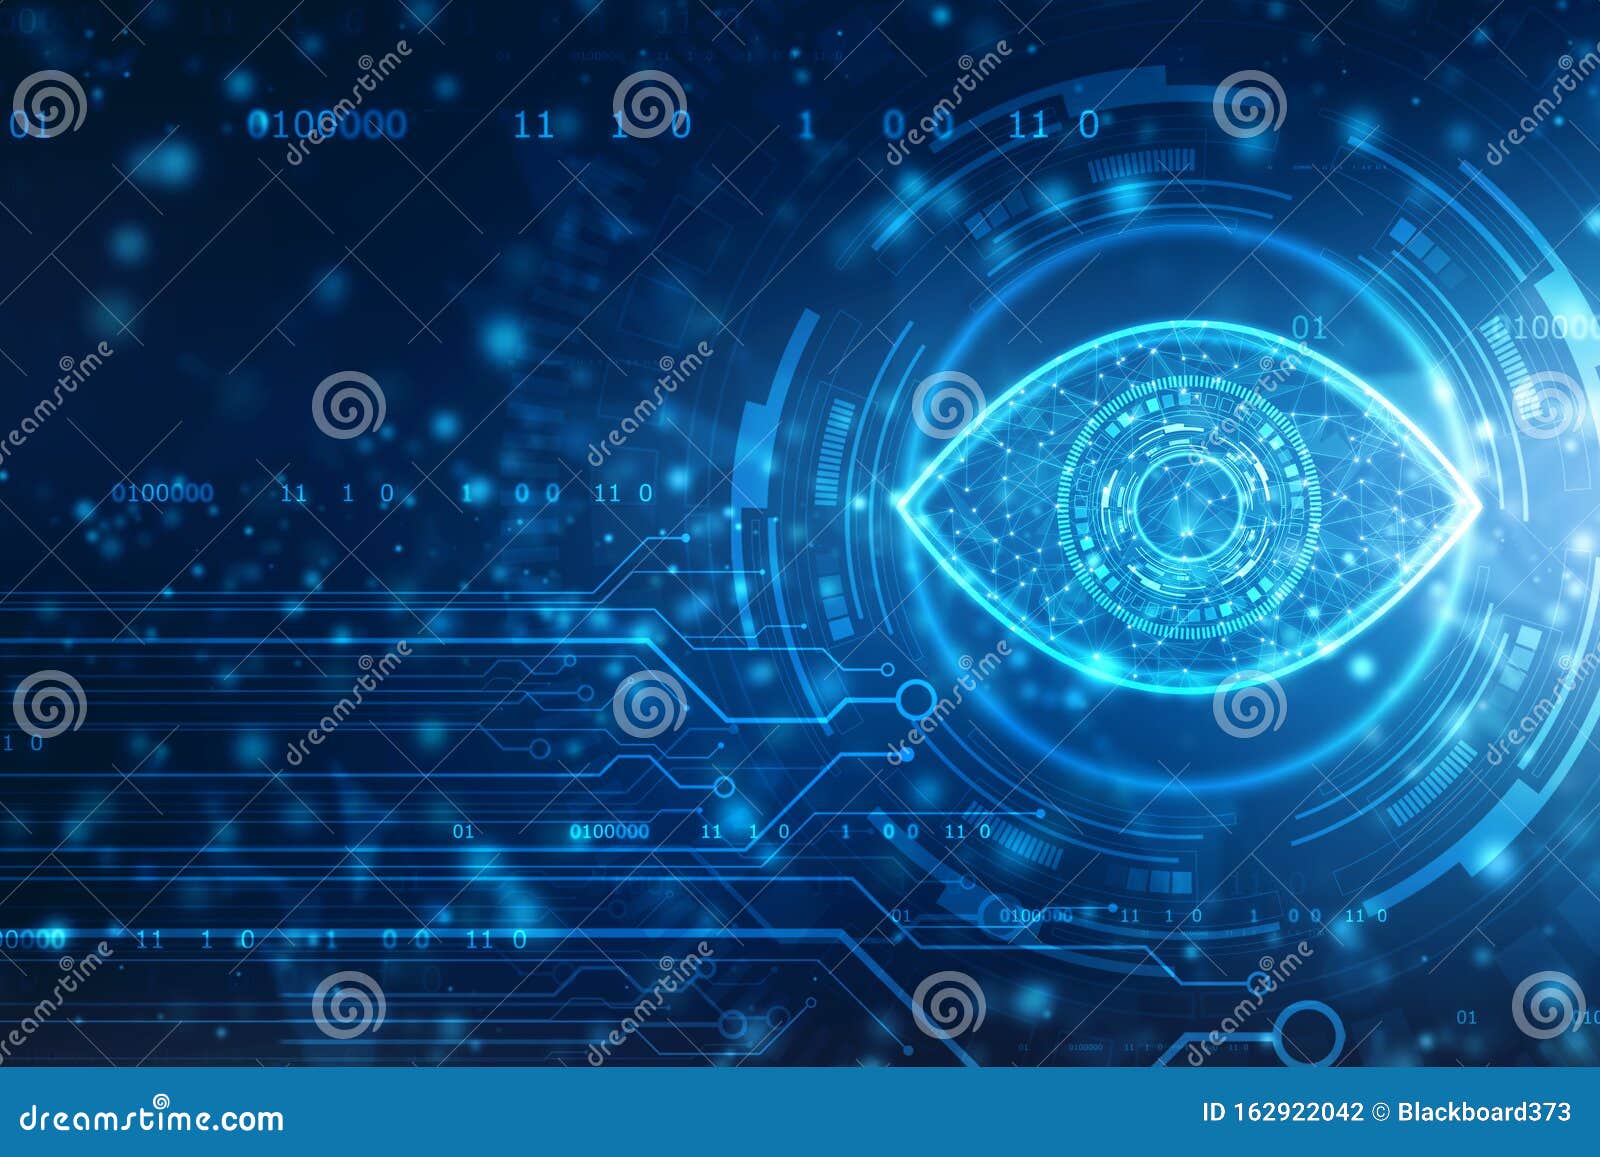 digital eye, security concept, cyber security concept, technology concept background